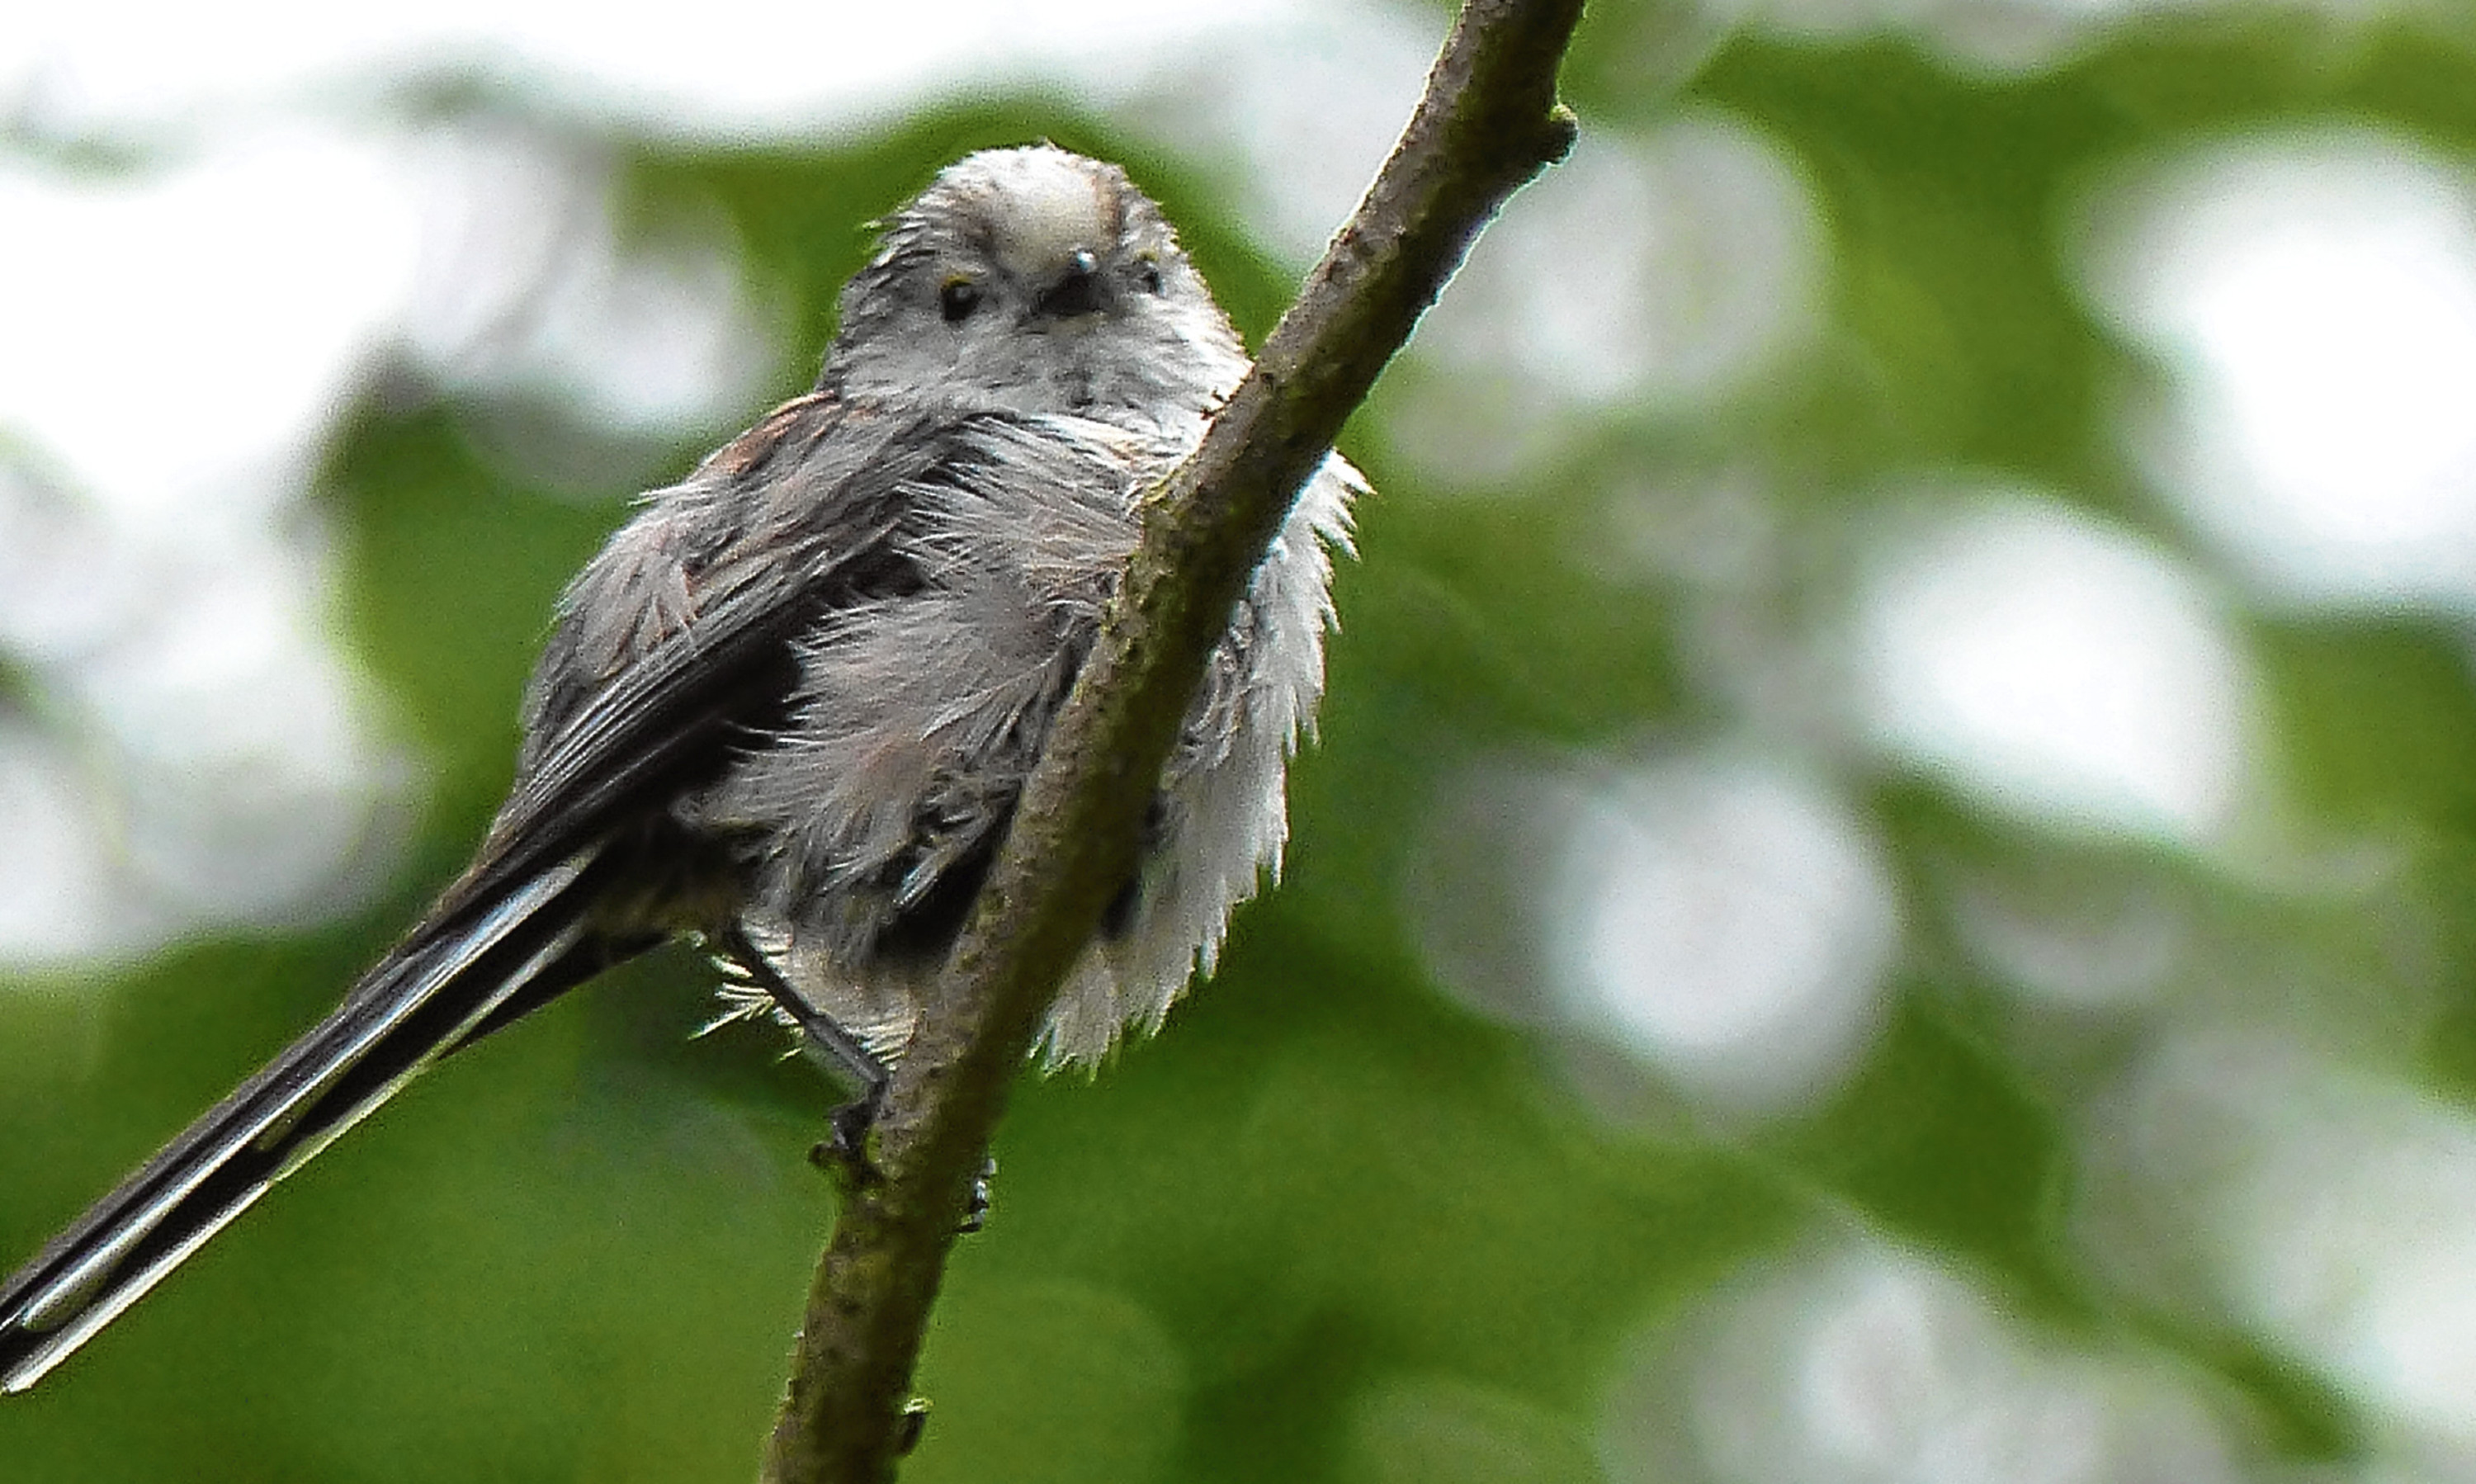 A long-tailed tit, like the ones that thrilled Jim Crumley in his visit to Balquhidder Glen as they swooped through a tree.